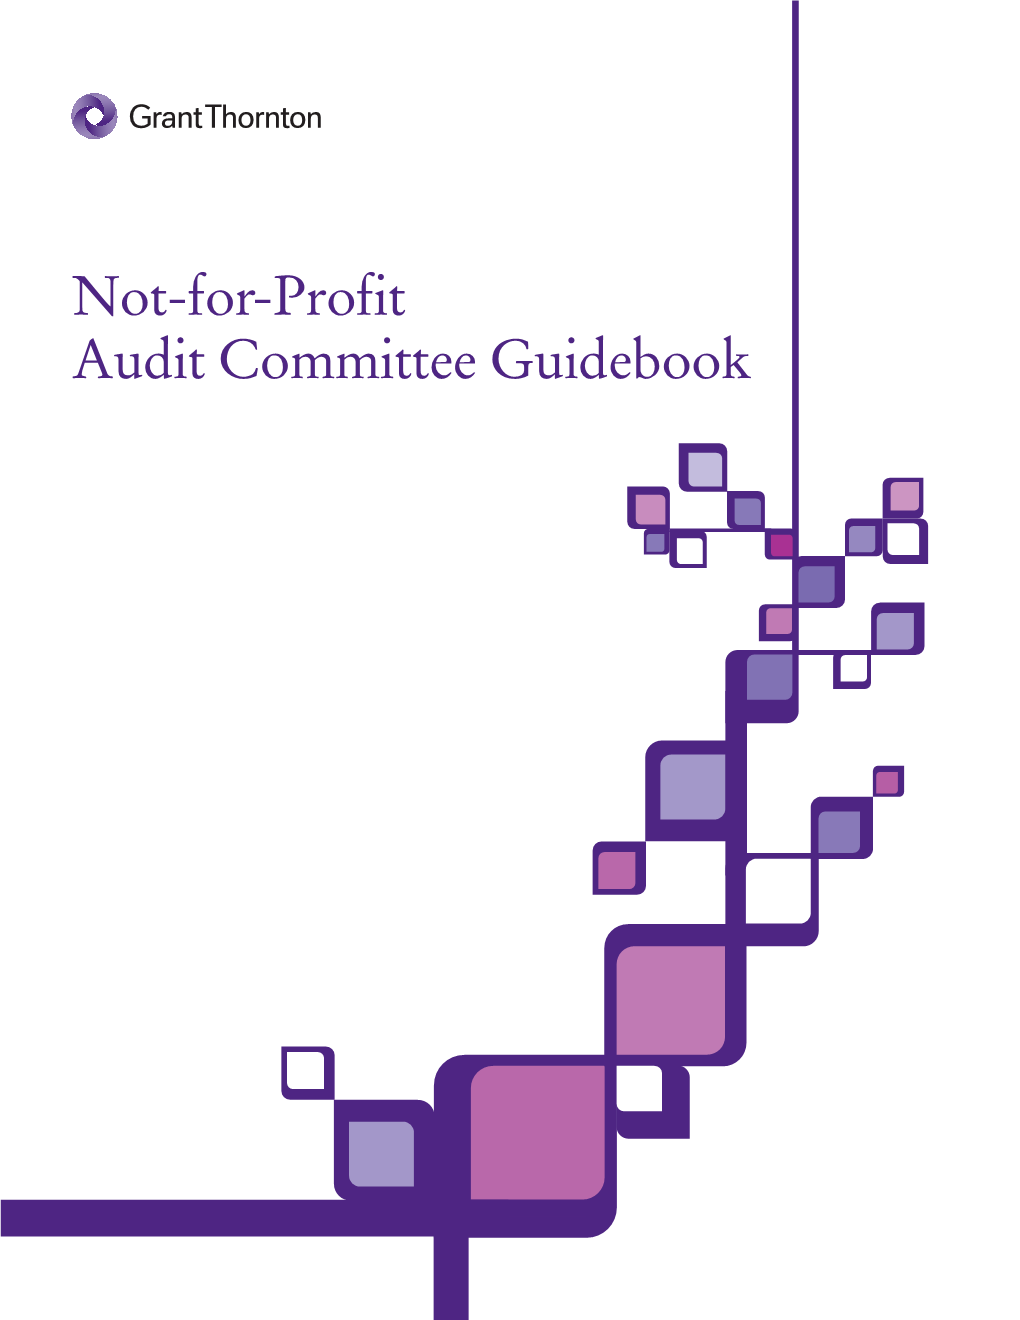 Not-For-Profit Audit Committee Guidebook Contents 4 Accountability and Independence: Guiding Principles of the Audit Committee 6 Basic Roles and Responsibilities